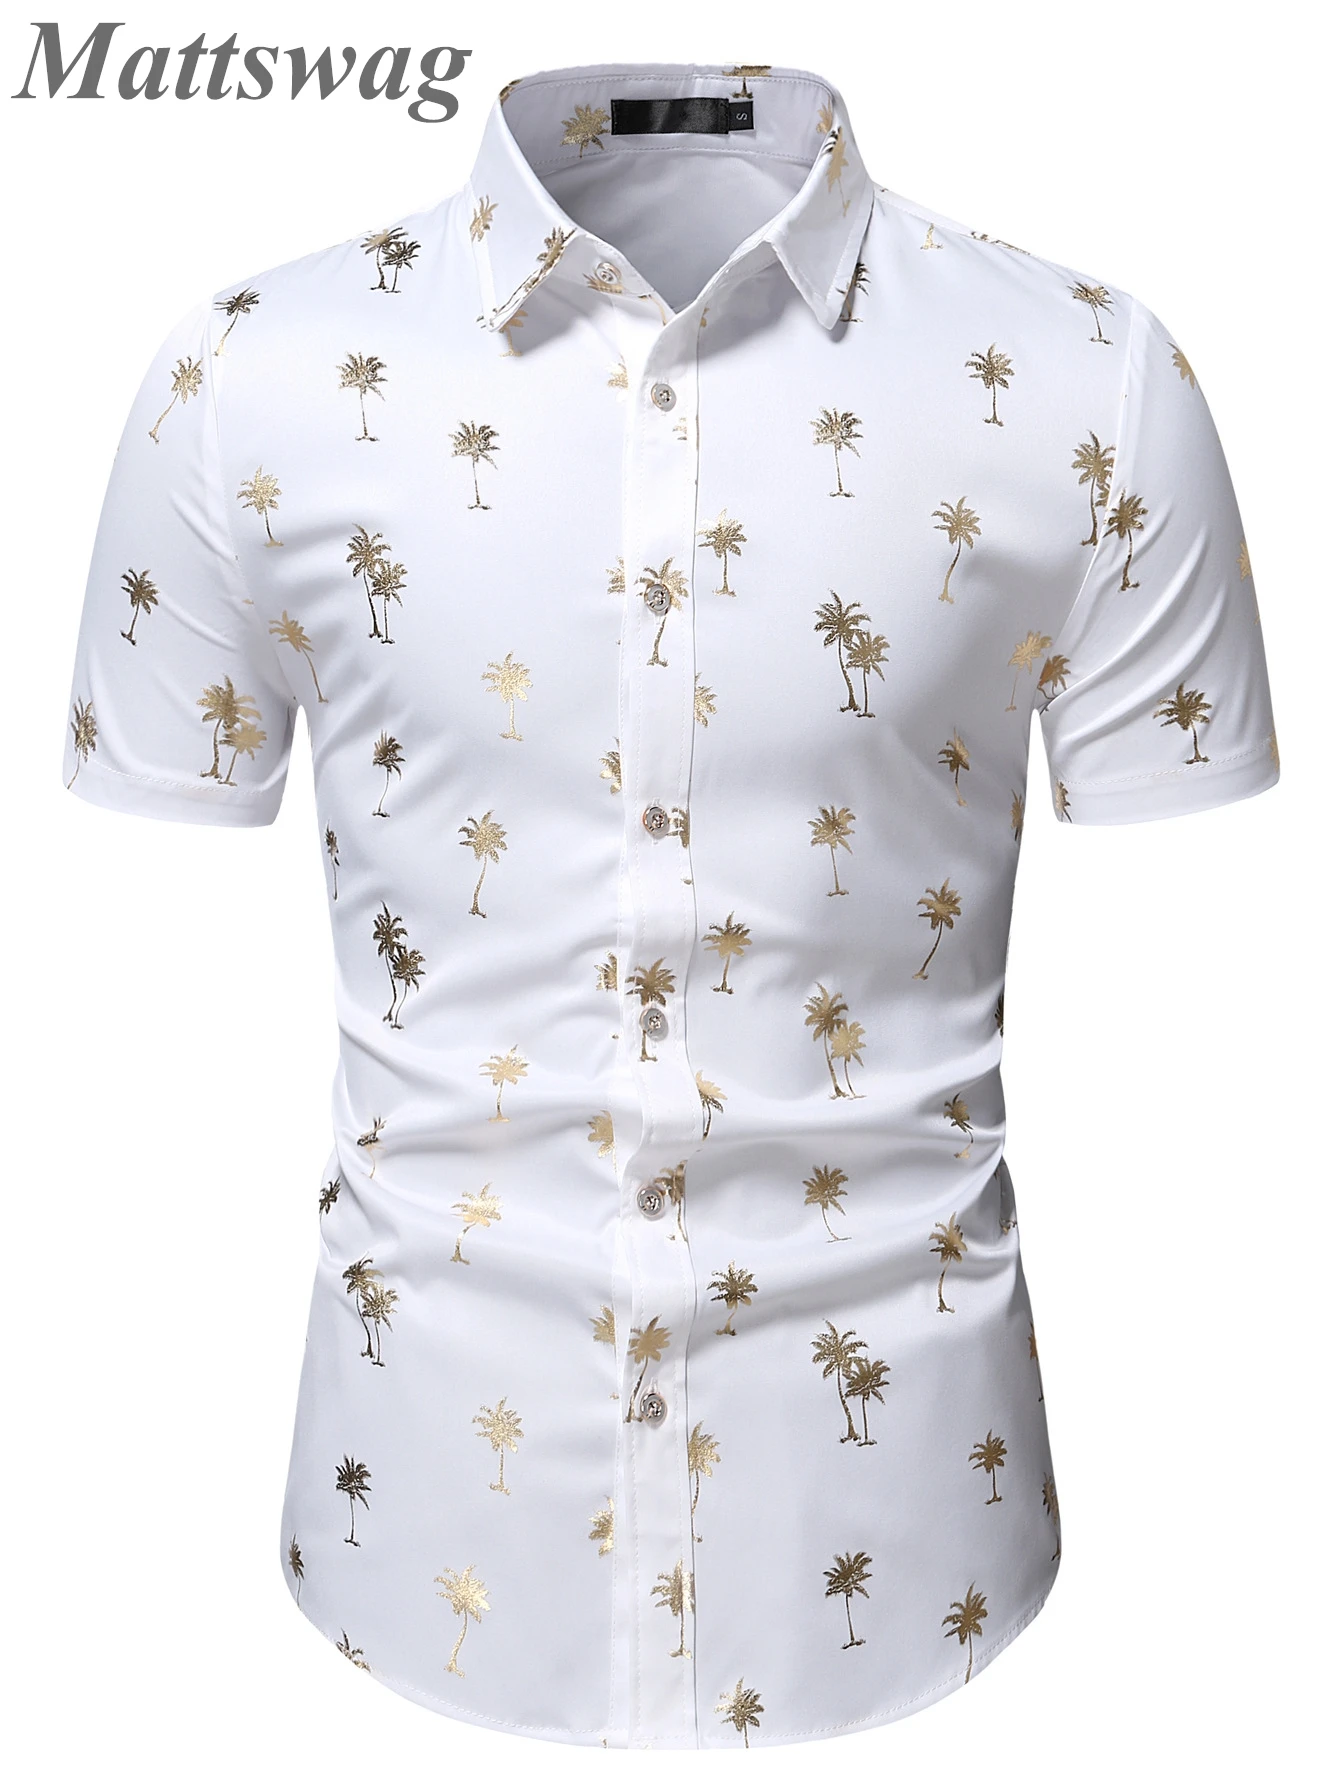 

Luxury Gold Bronzing Printed Short Sleeve Dress Up Shirts Male Fashion Party Nightclub Chemise Hombre Casual Summer Daily Shirts